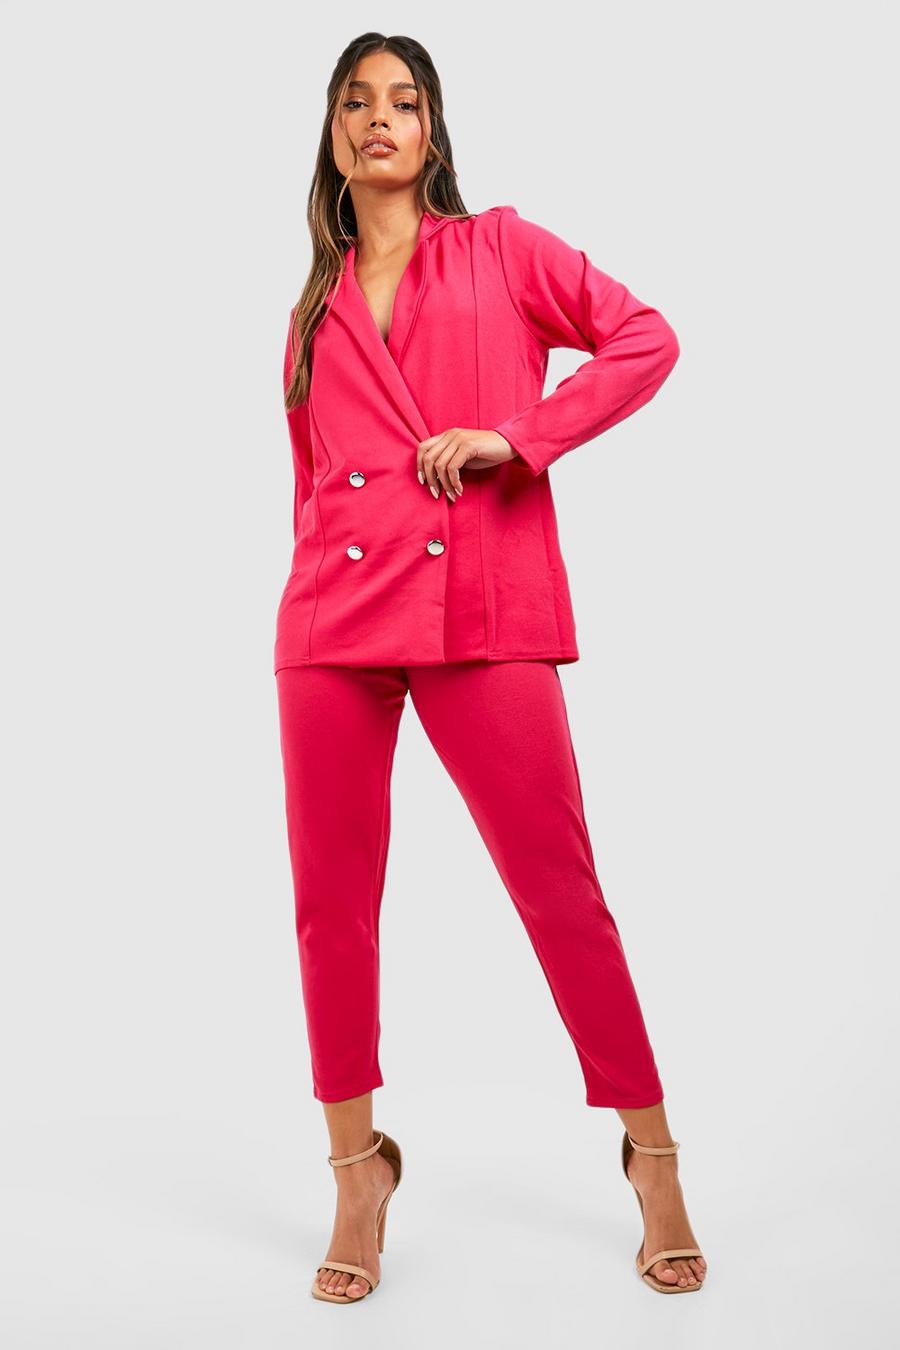 Hot pink Double Breasted Blazer And Trouser Suit Set